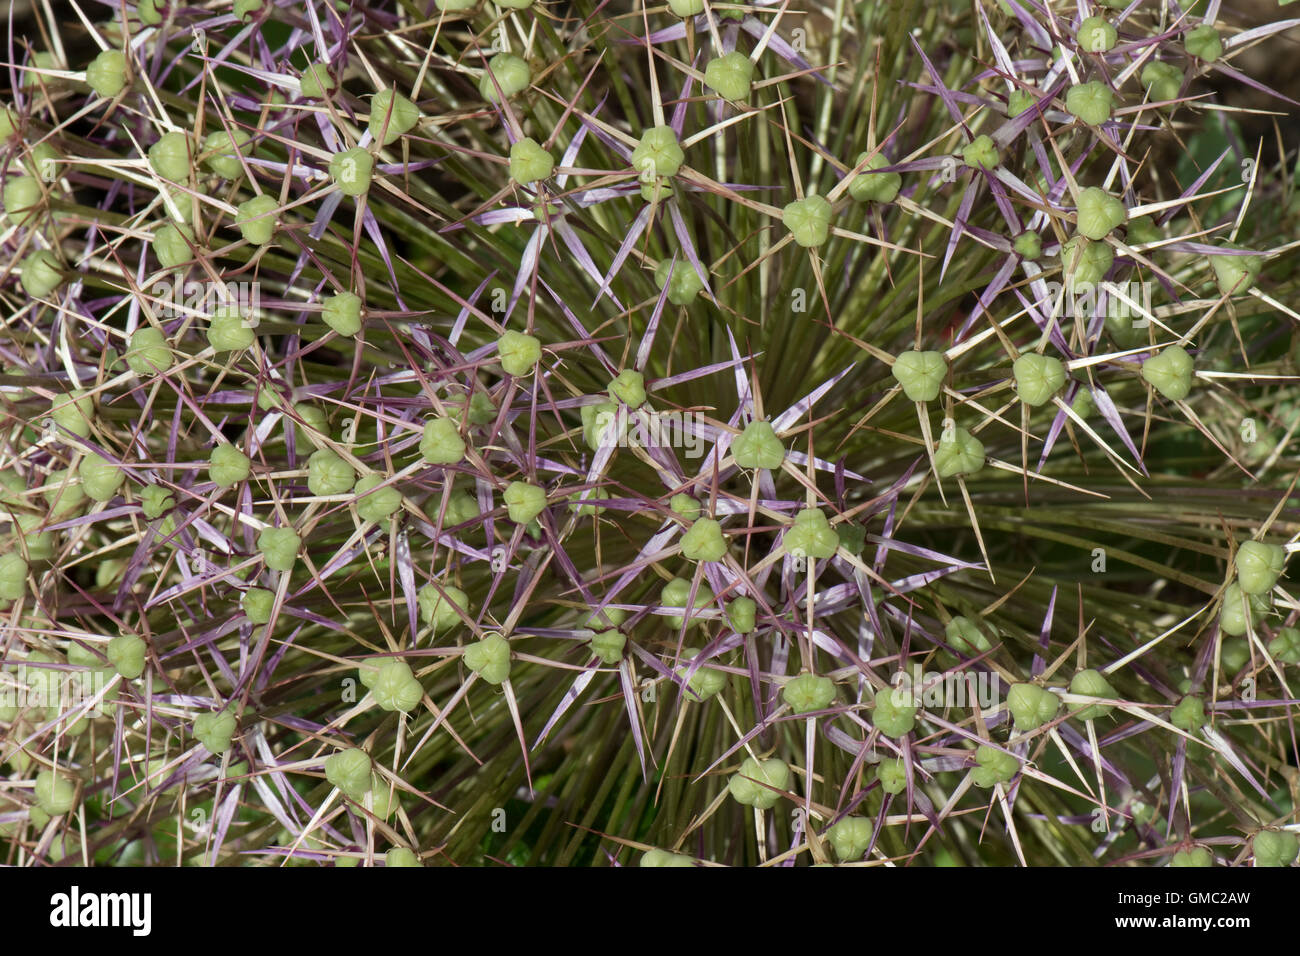 Flower head florets on a Star of Persia, Allium christophii, withdeveloping seeds and green ovaries Stock Photo